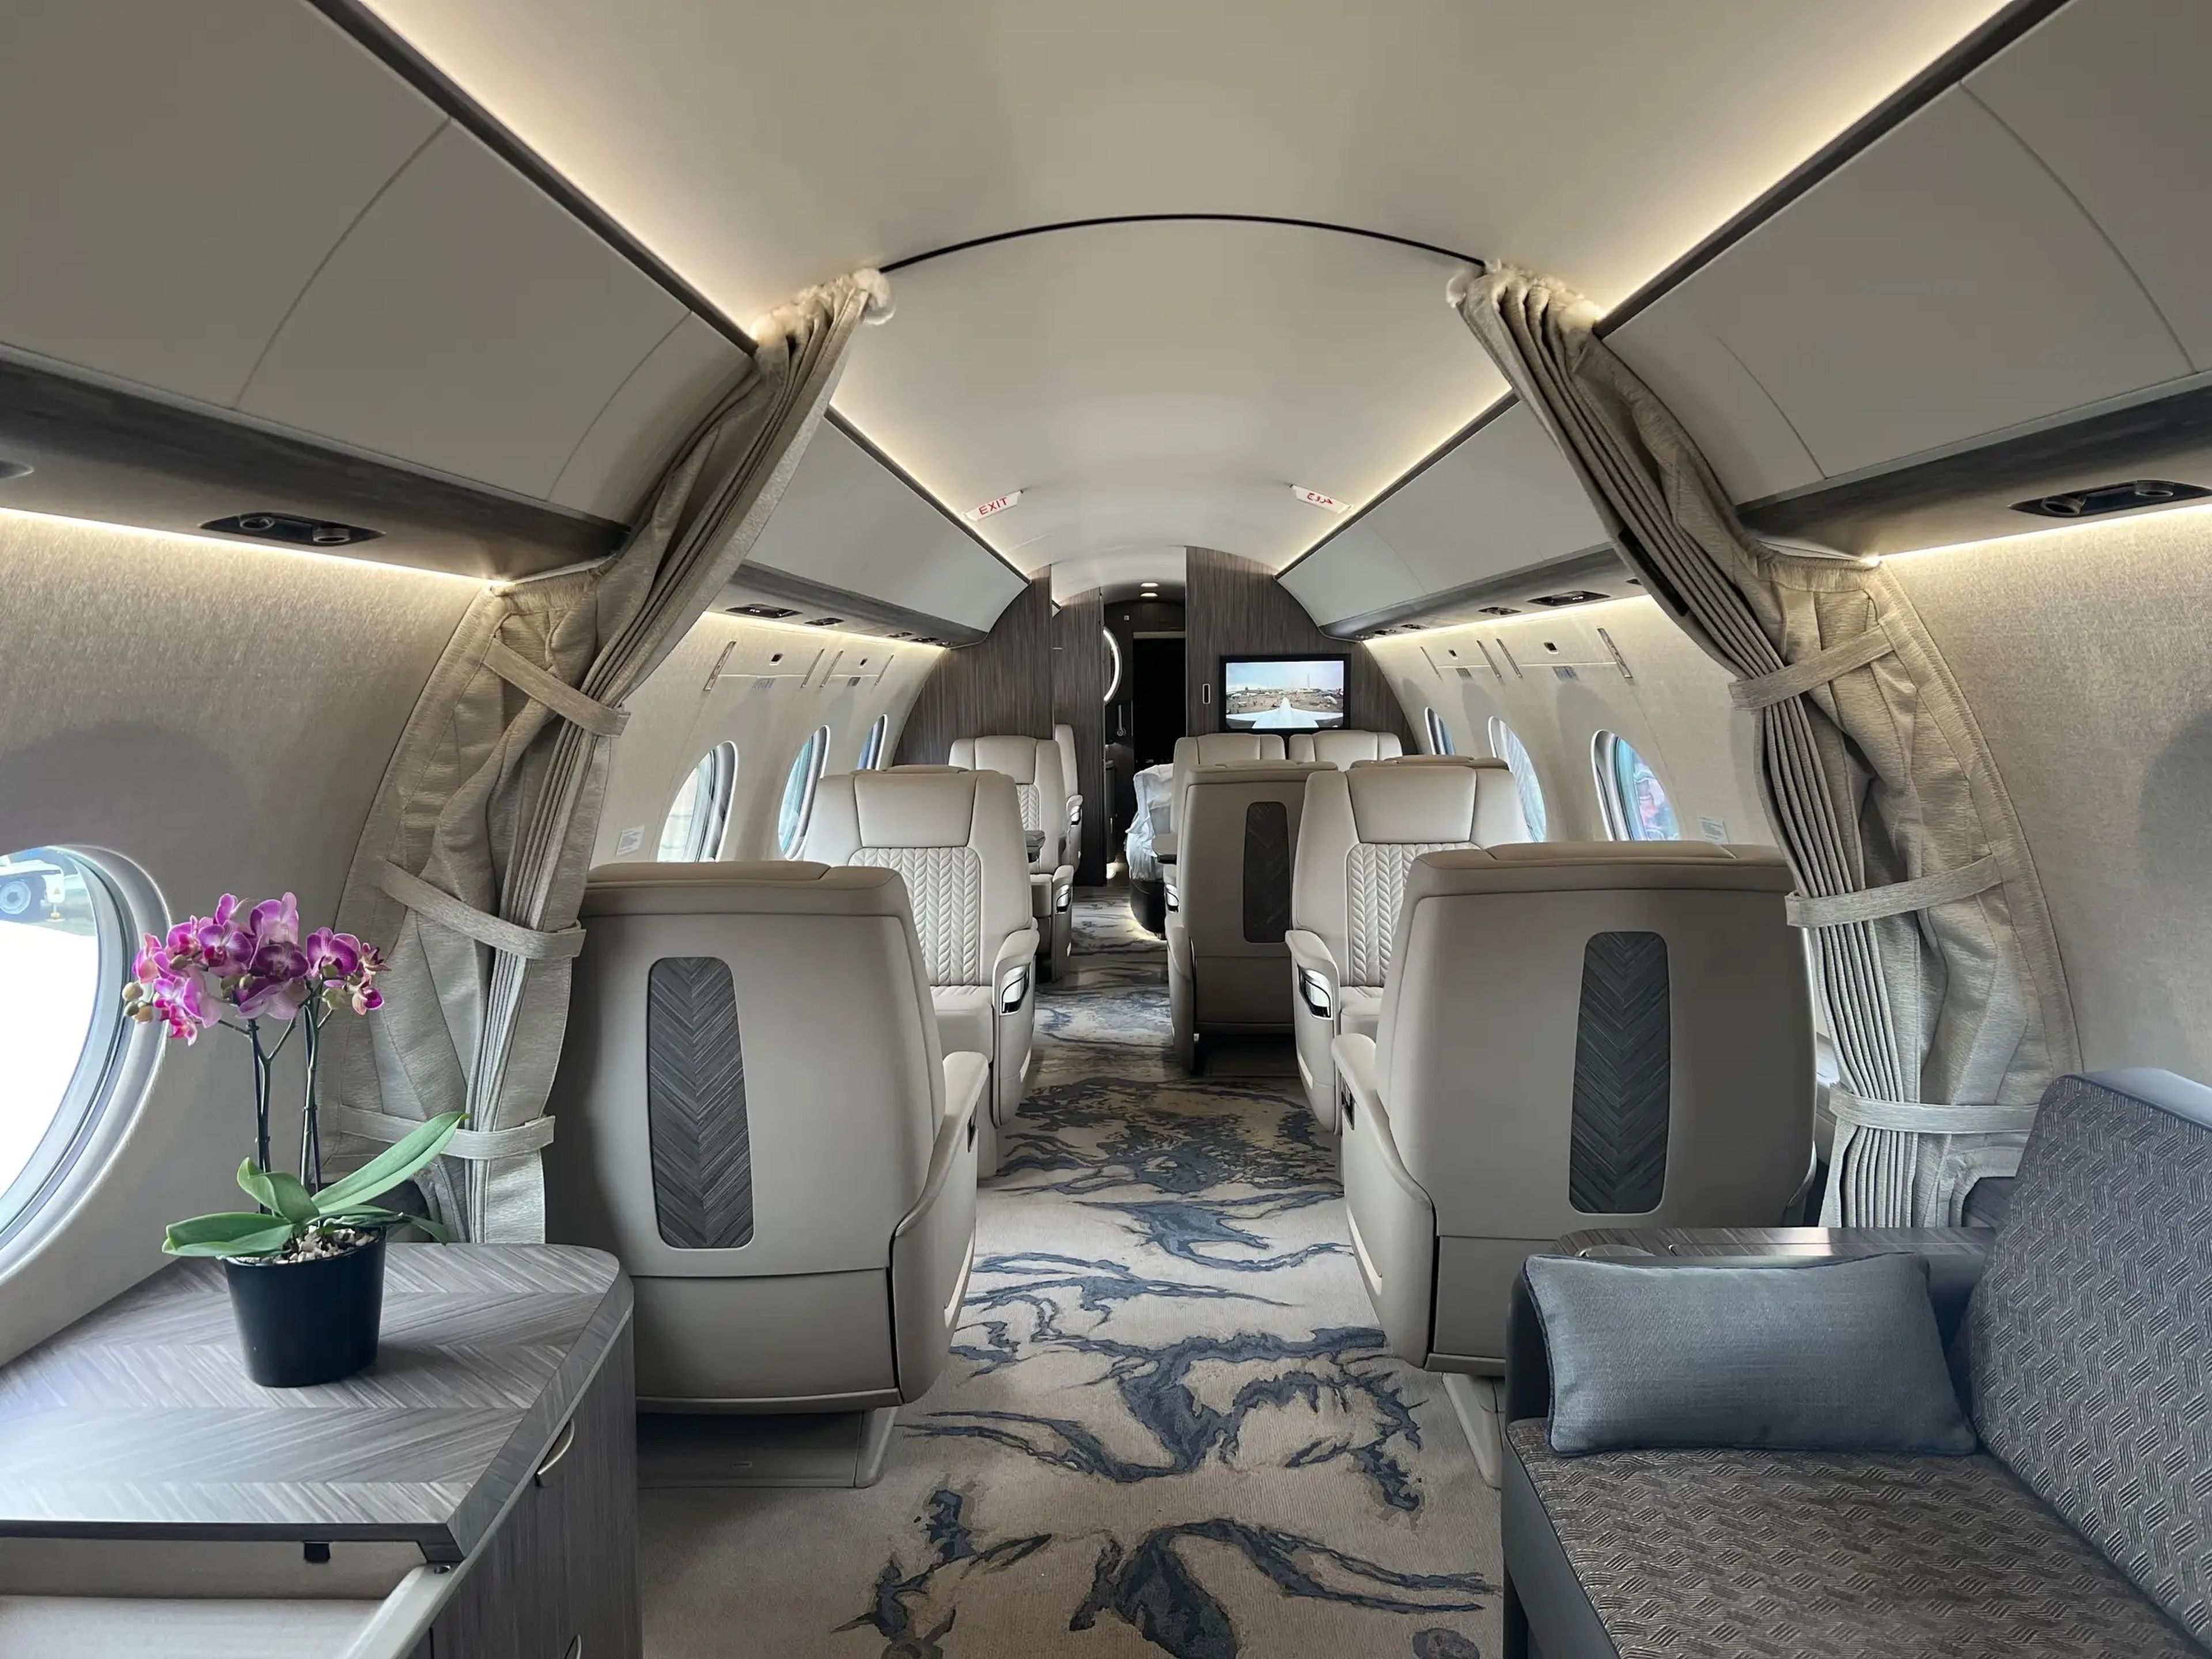 Inside the entire cabin of Qatar's G700 private jet.